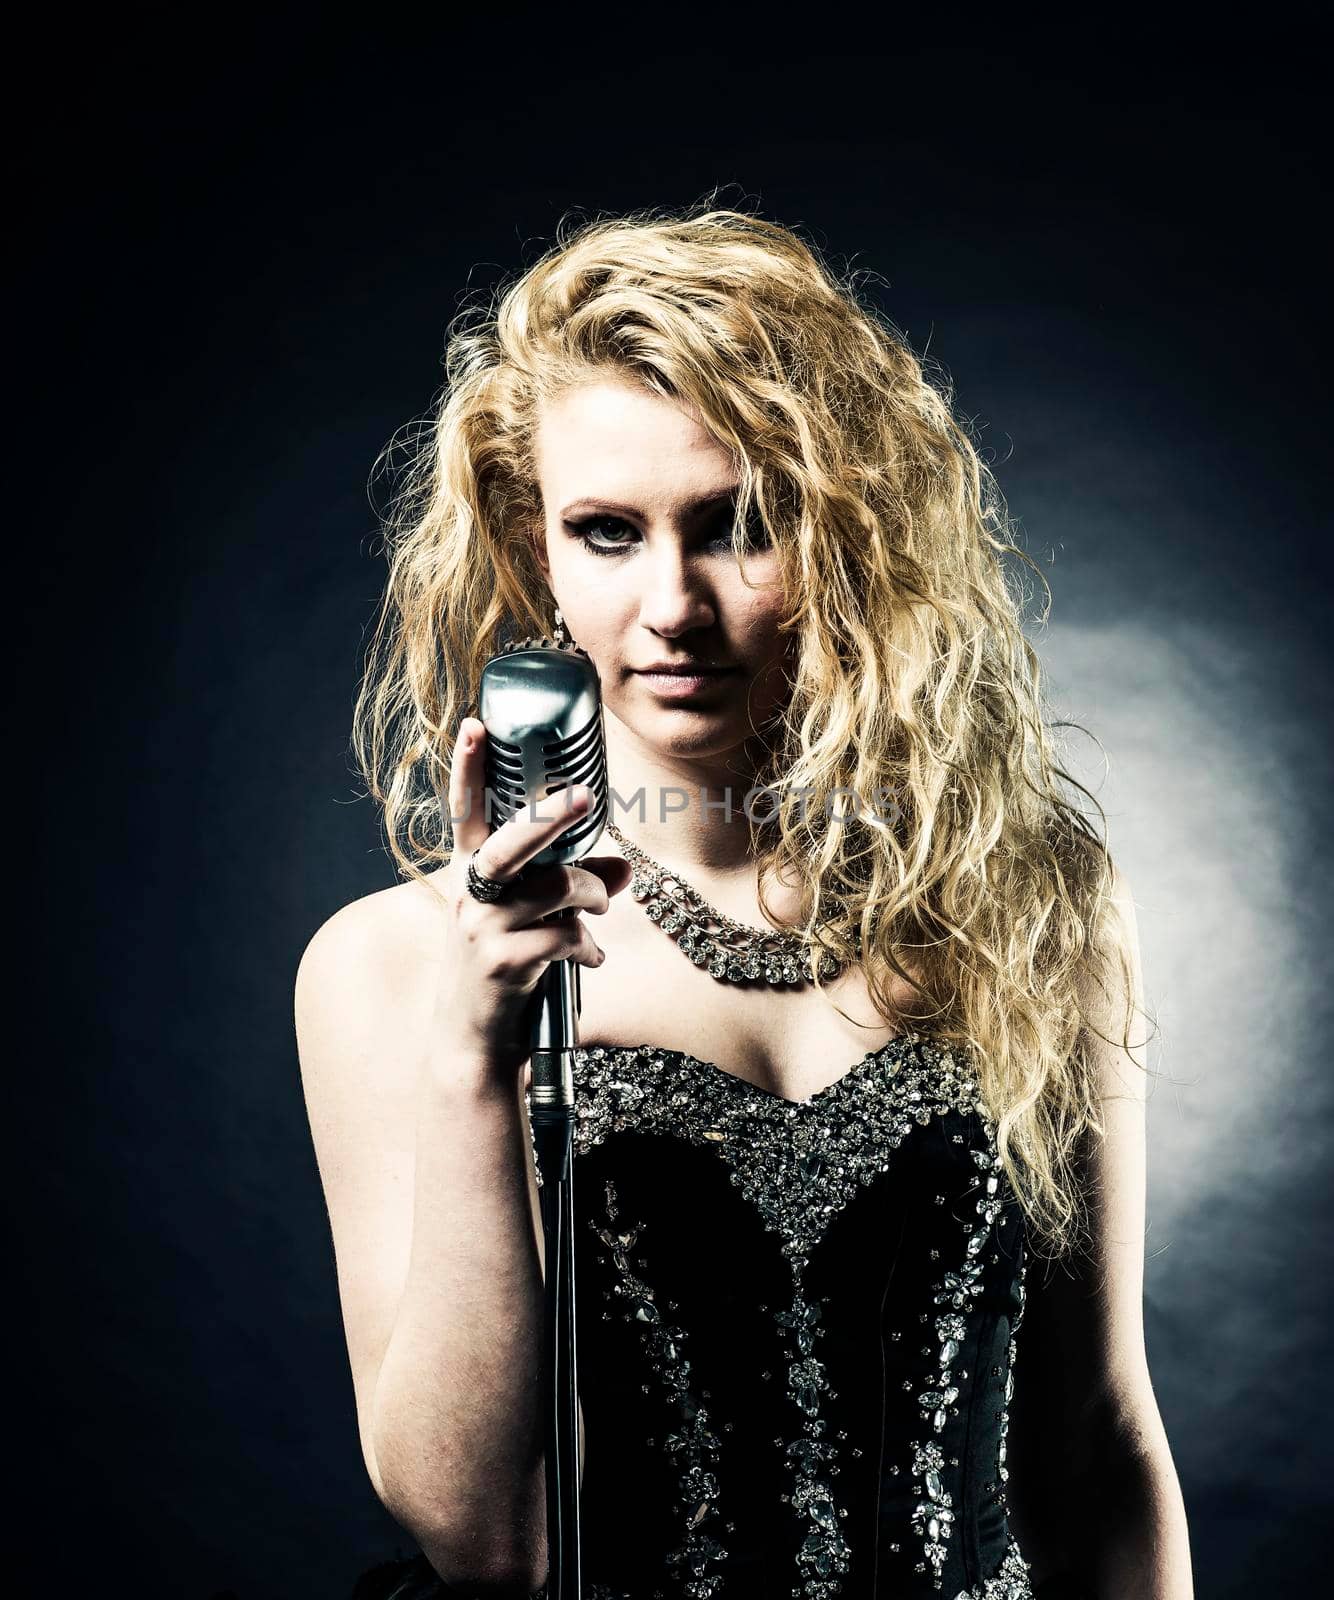 beautiful blonde woman singer in a black dress holding a microphone and sings a song. by SmartPhotoLab